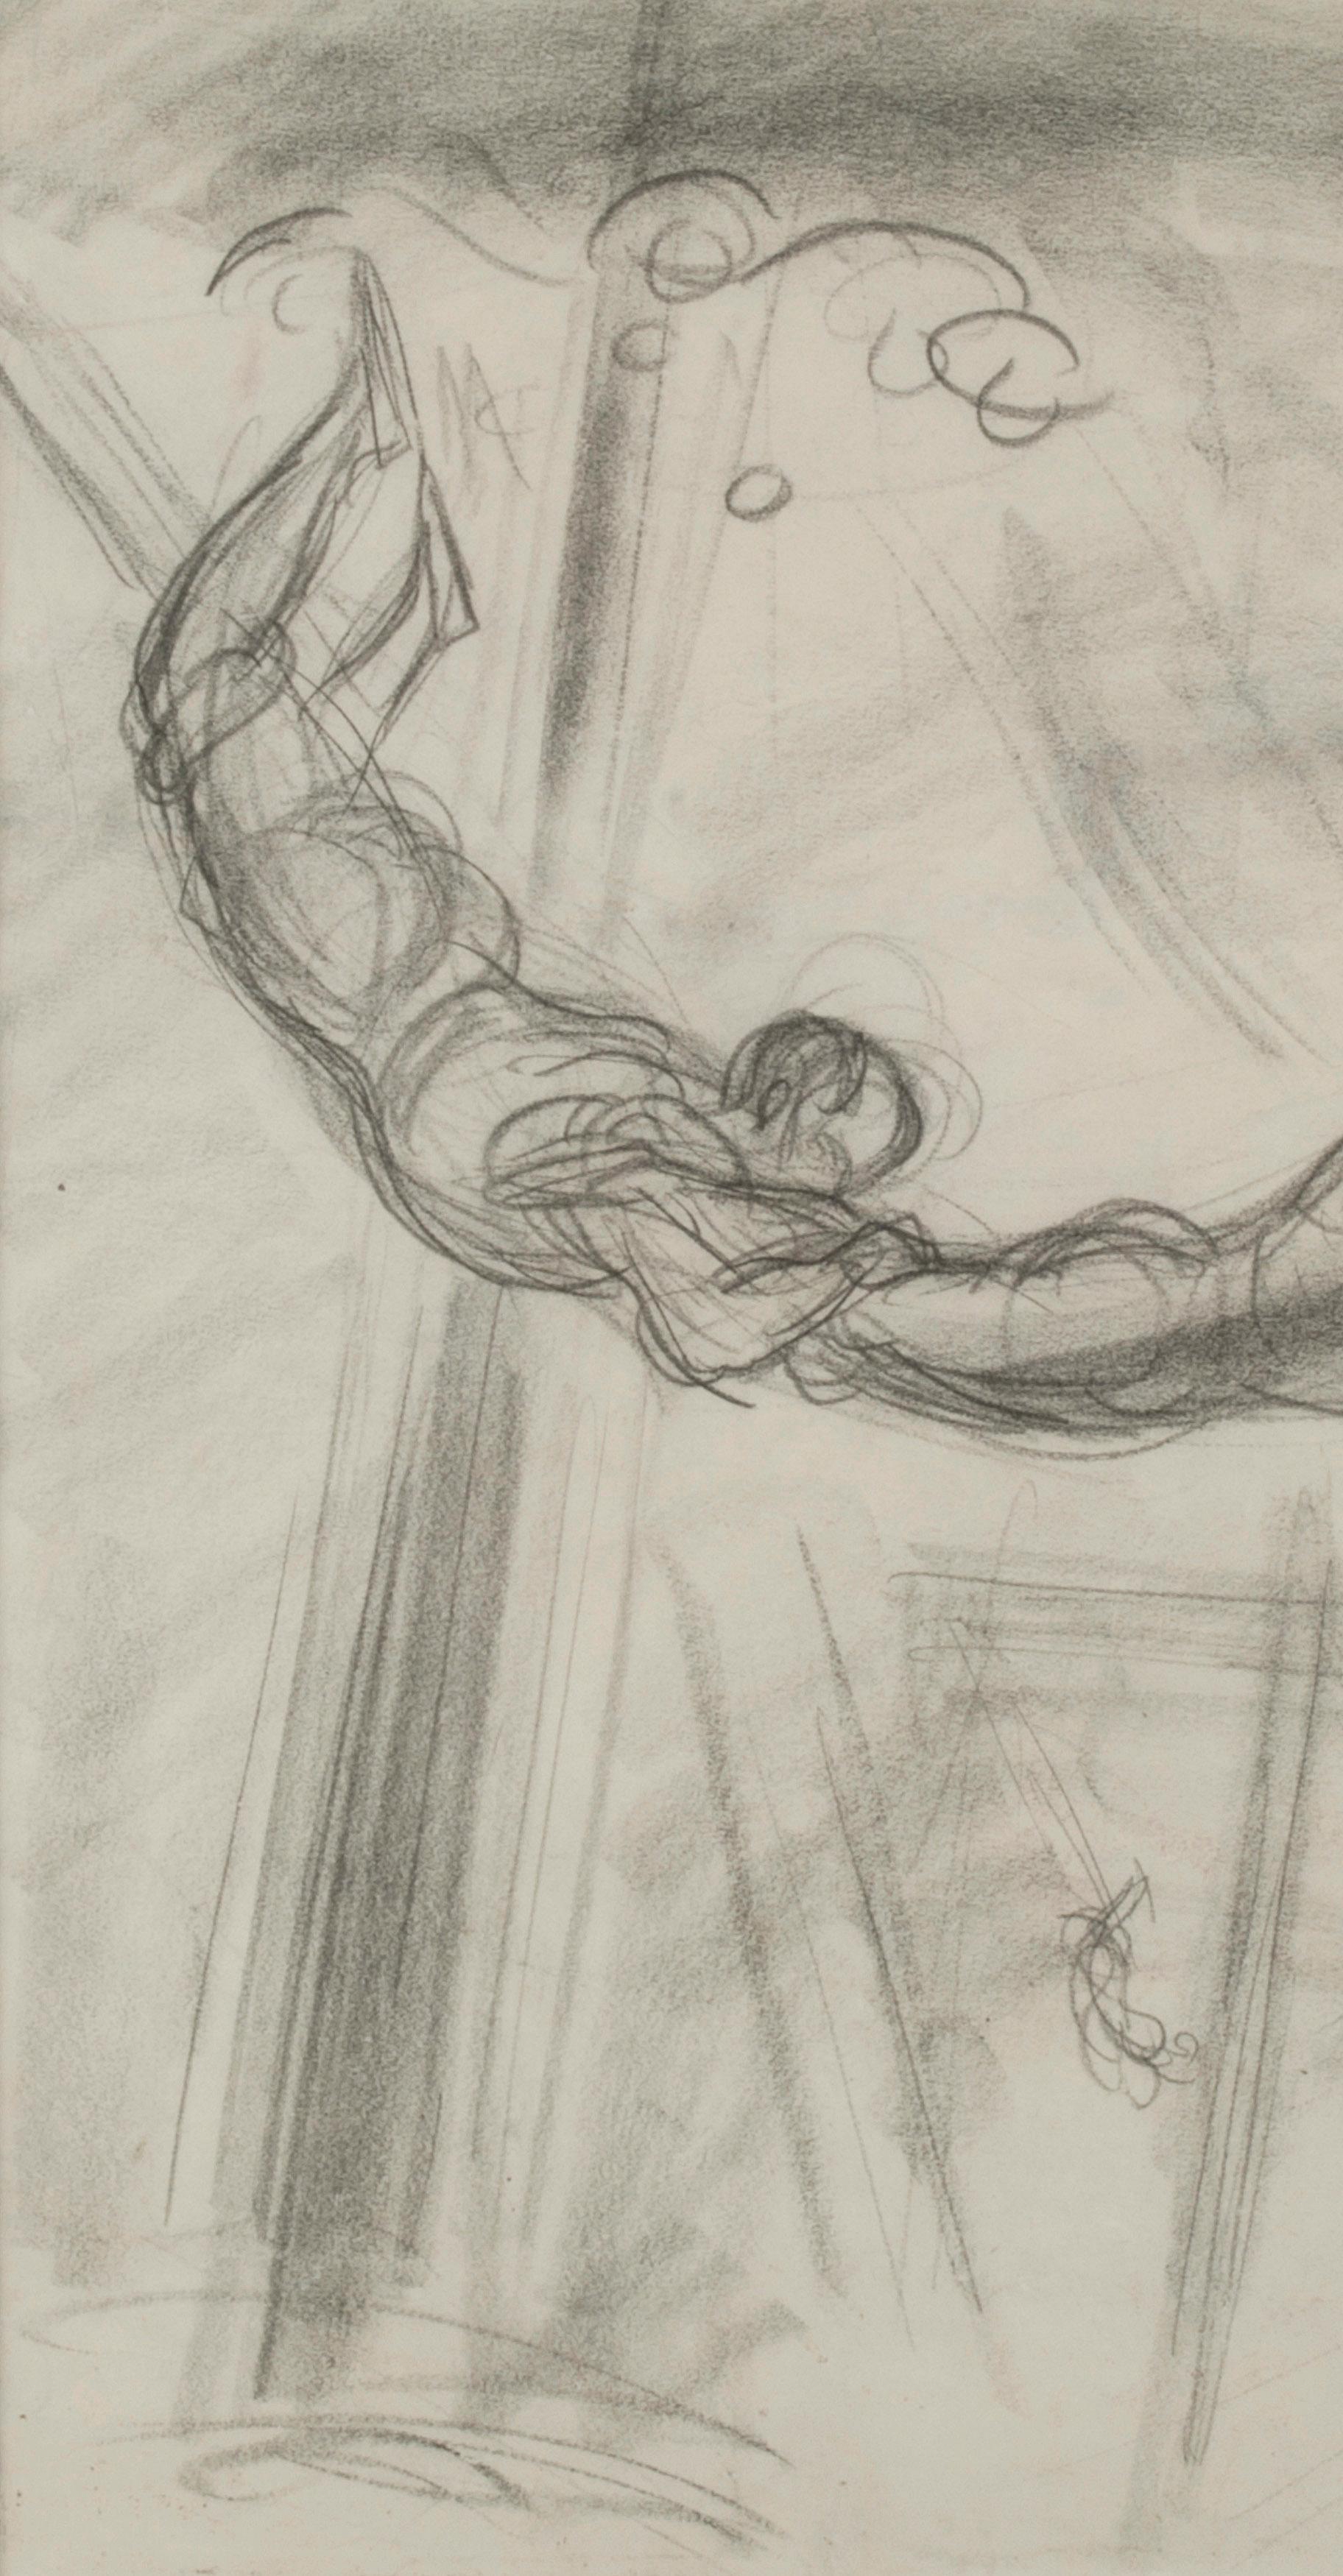 Untitled (Study for The Aerialists)
Graphite on paper, 1932
Signed lower right in pencil: 